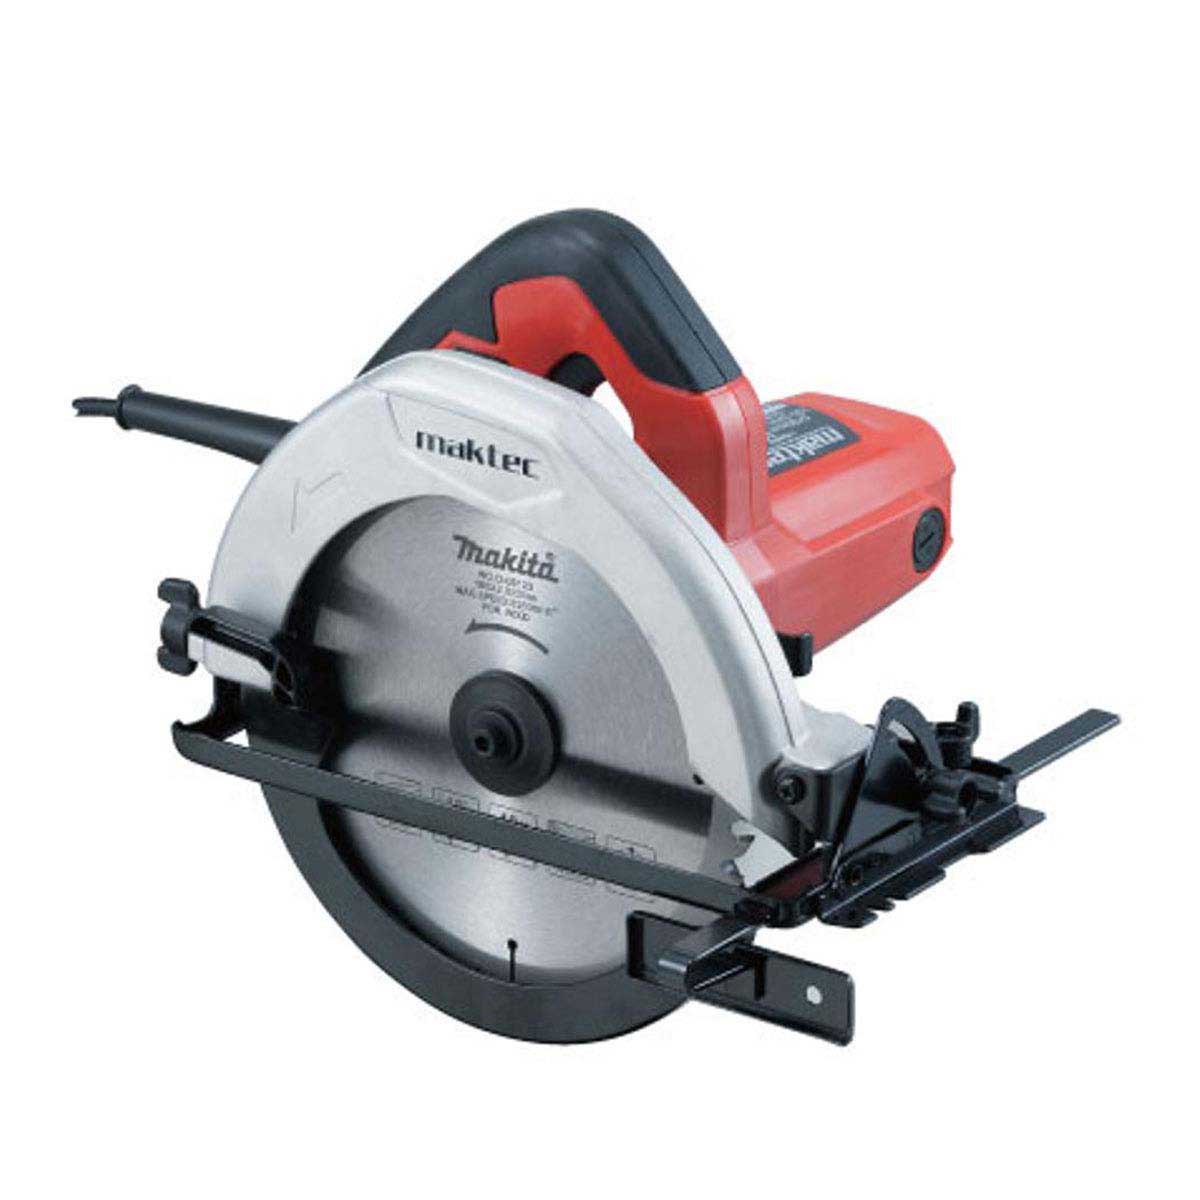 Tray saw 1050 watts 7.25 inches